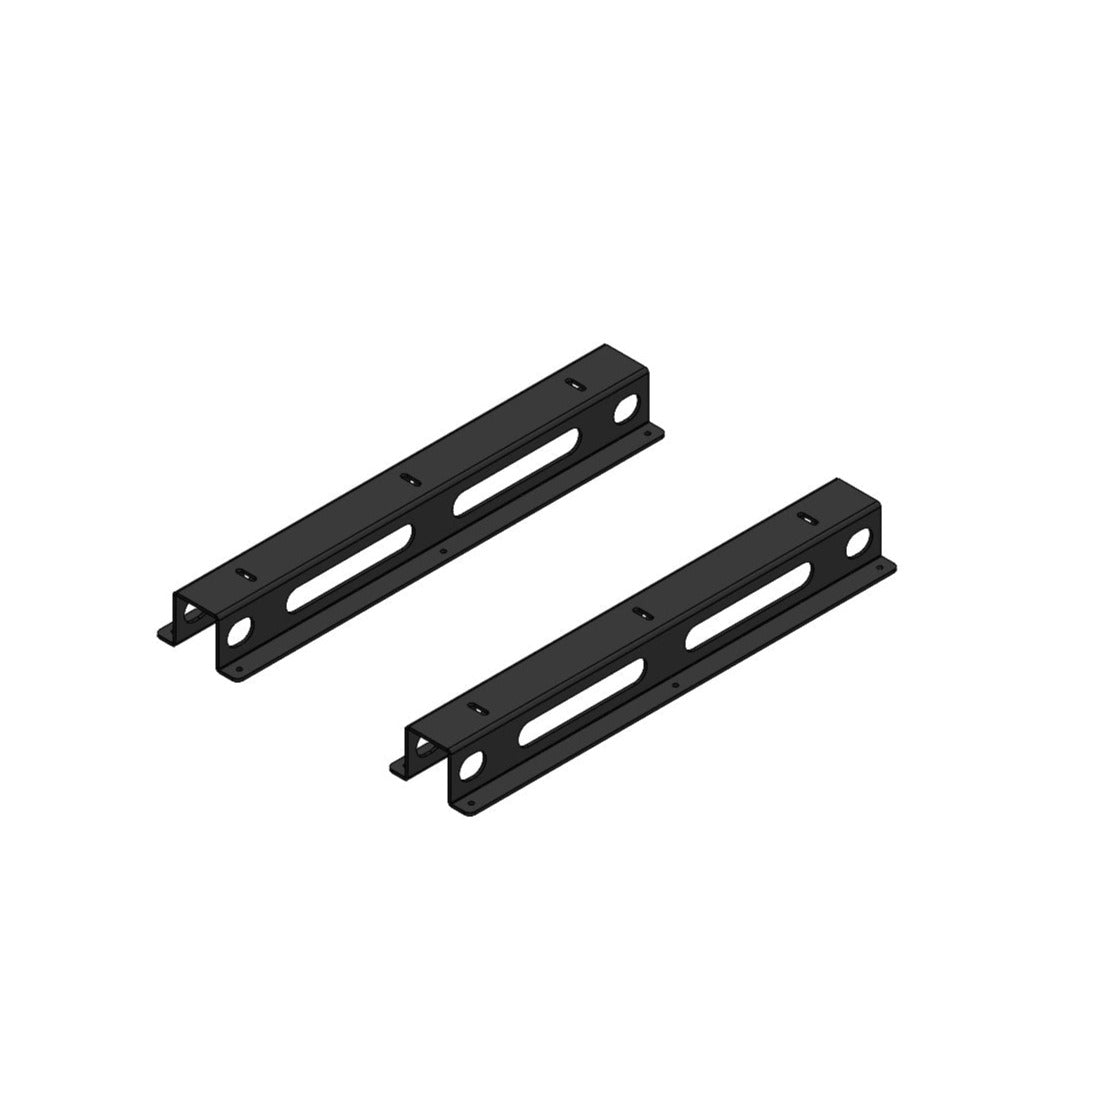 20&quot; Slide Tray Riser For Galley Cabinets